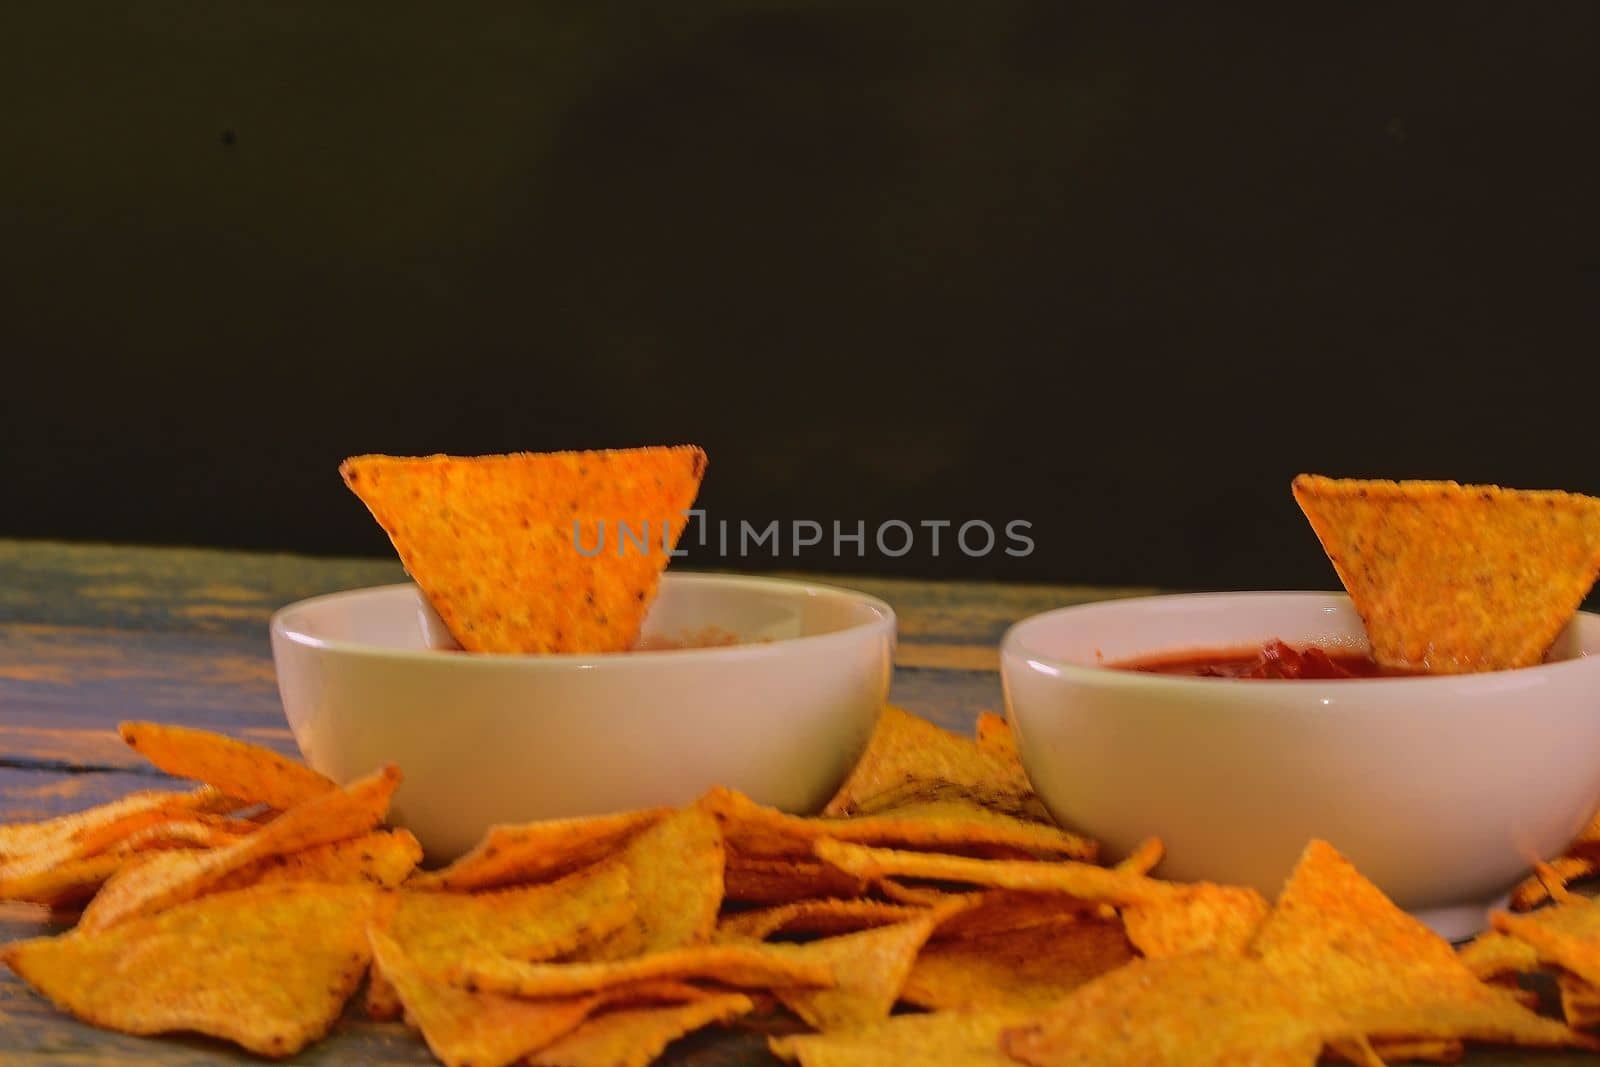 Chili corn-chips with salsa dip on wooden background. Black copy space for text.